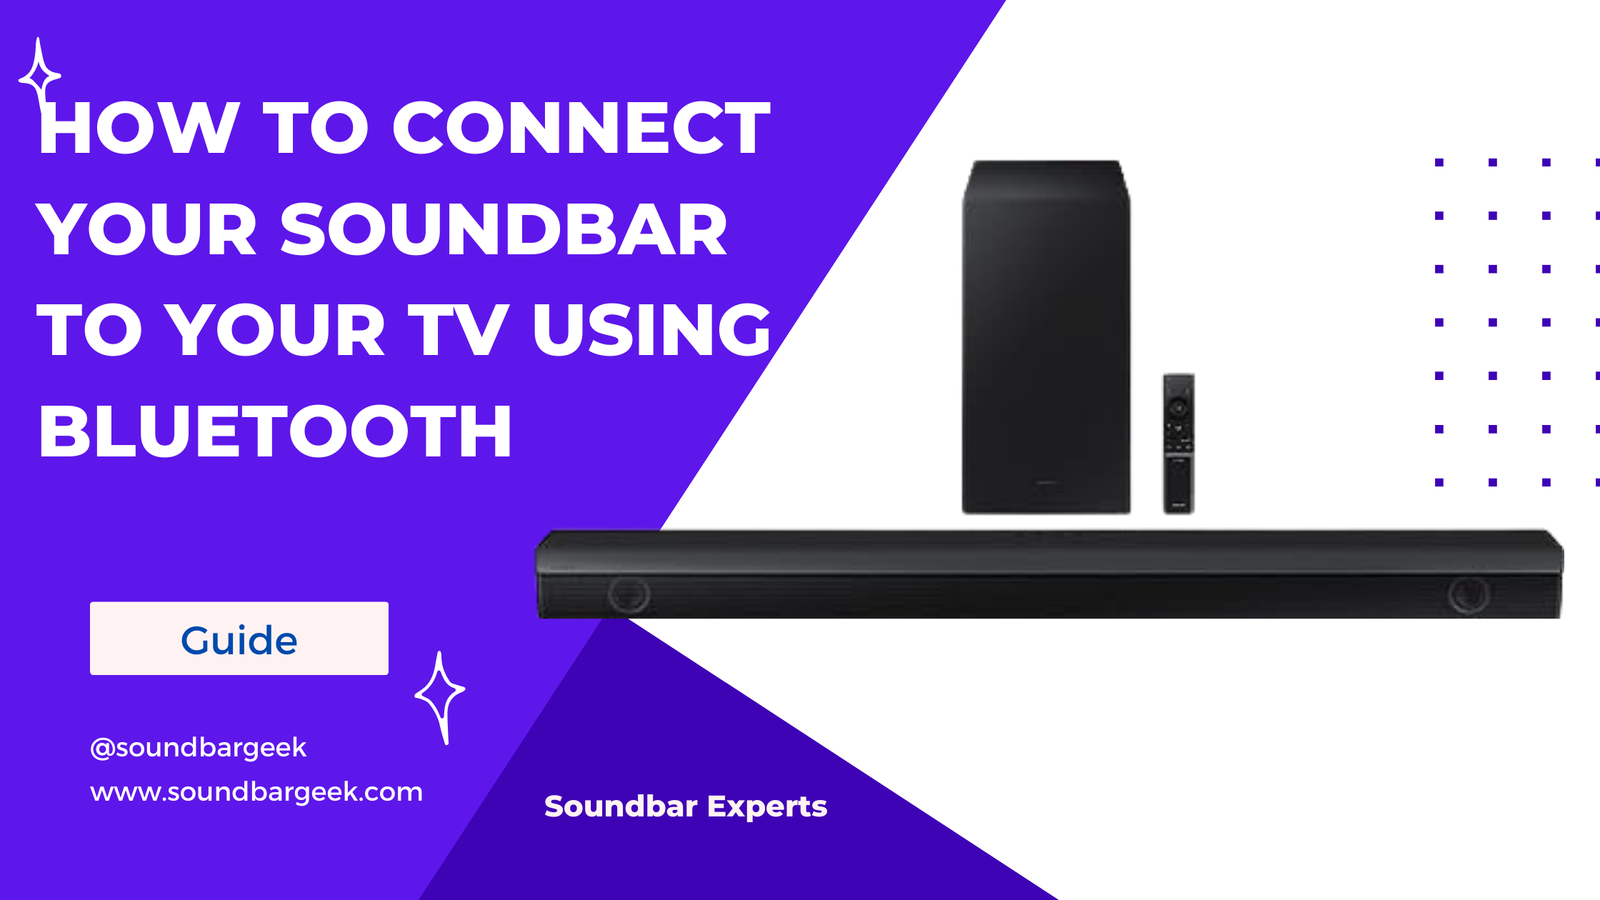 How to Connect Your Soundbar to Your TV Using Bluetooth